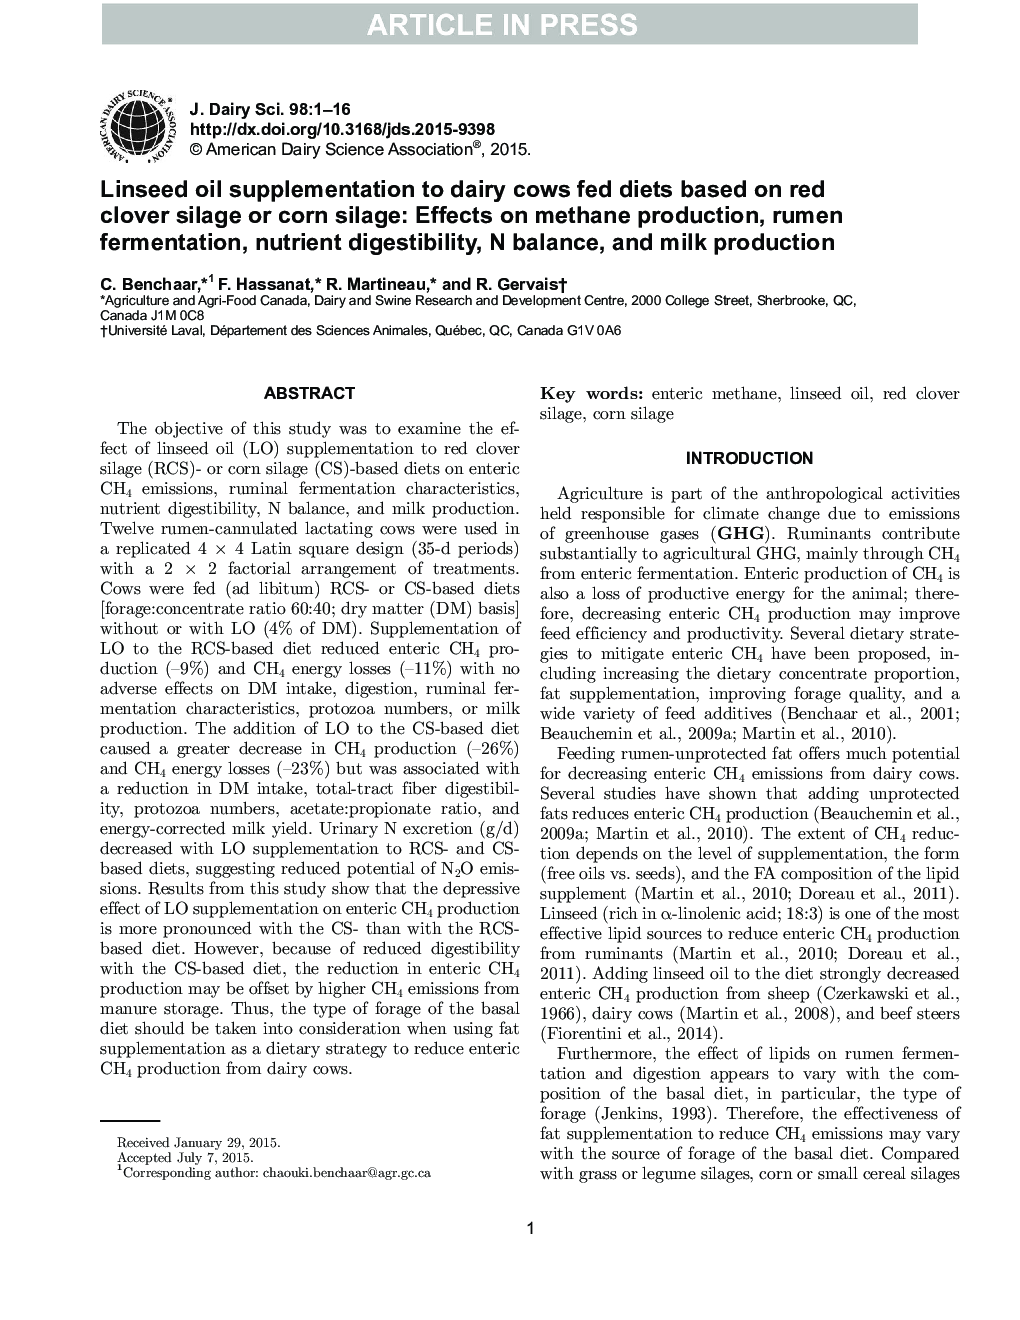 Linseed oil supplementation to dairy cows fed diets based on red clover silage or corn silage: Effects on methane production, rumen fermentation, nutrient digestibility, N balance, and milk production